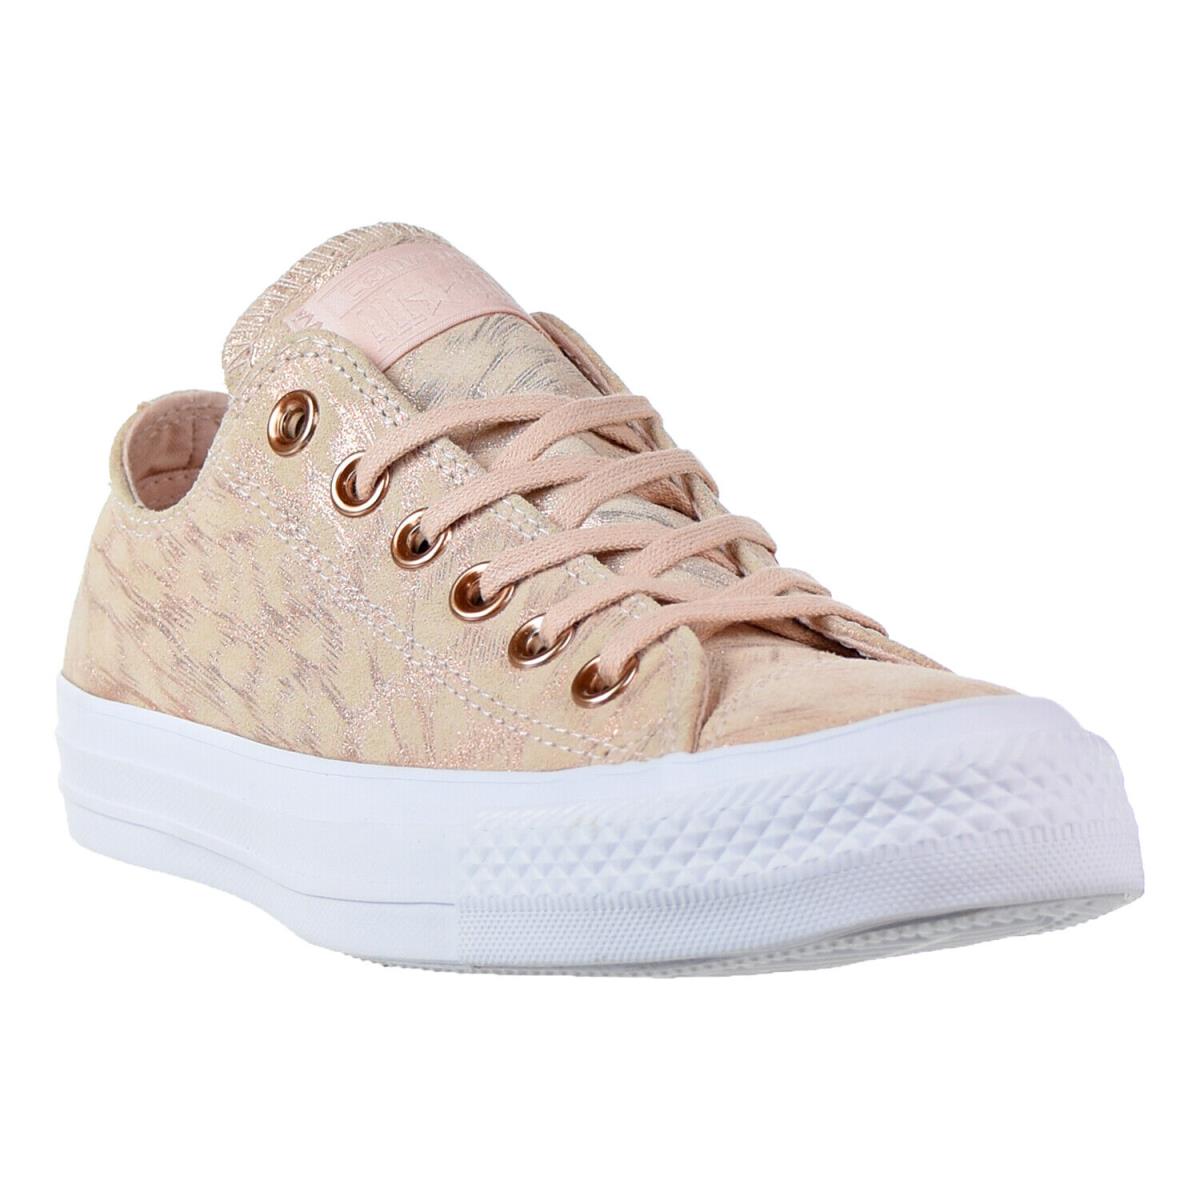 Converse Chuck Taylor All Star Ox Women`s Shoes Dust Pink-white 557999C